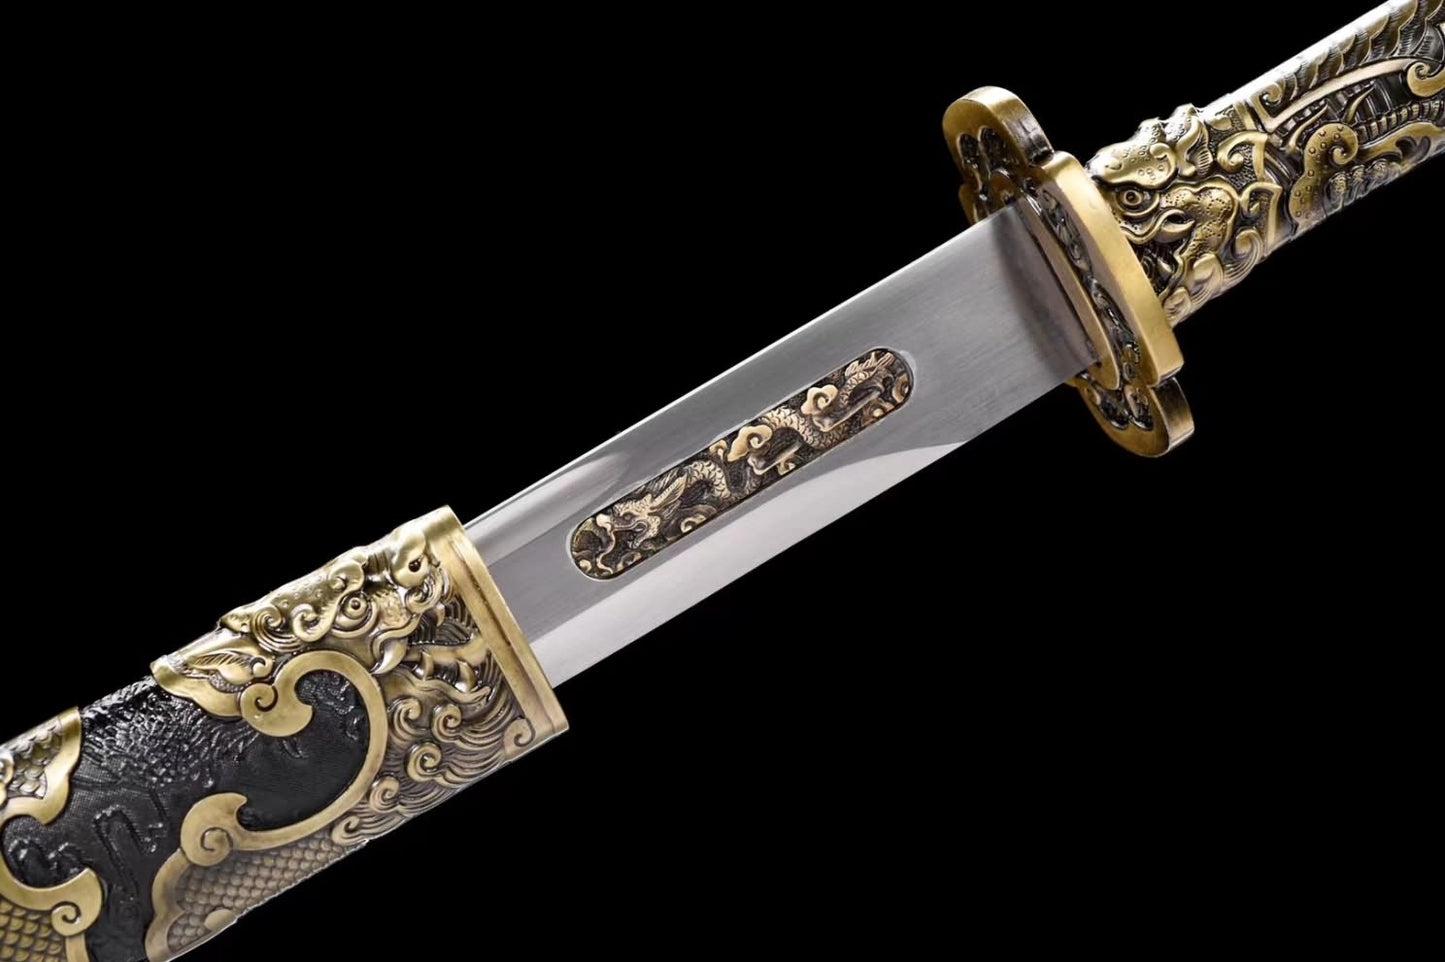 Qing dao Sword,Chinese Swords Real,Hand Forged High carobon Steel Blade,Alloy Handle